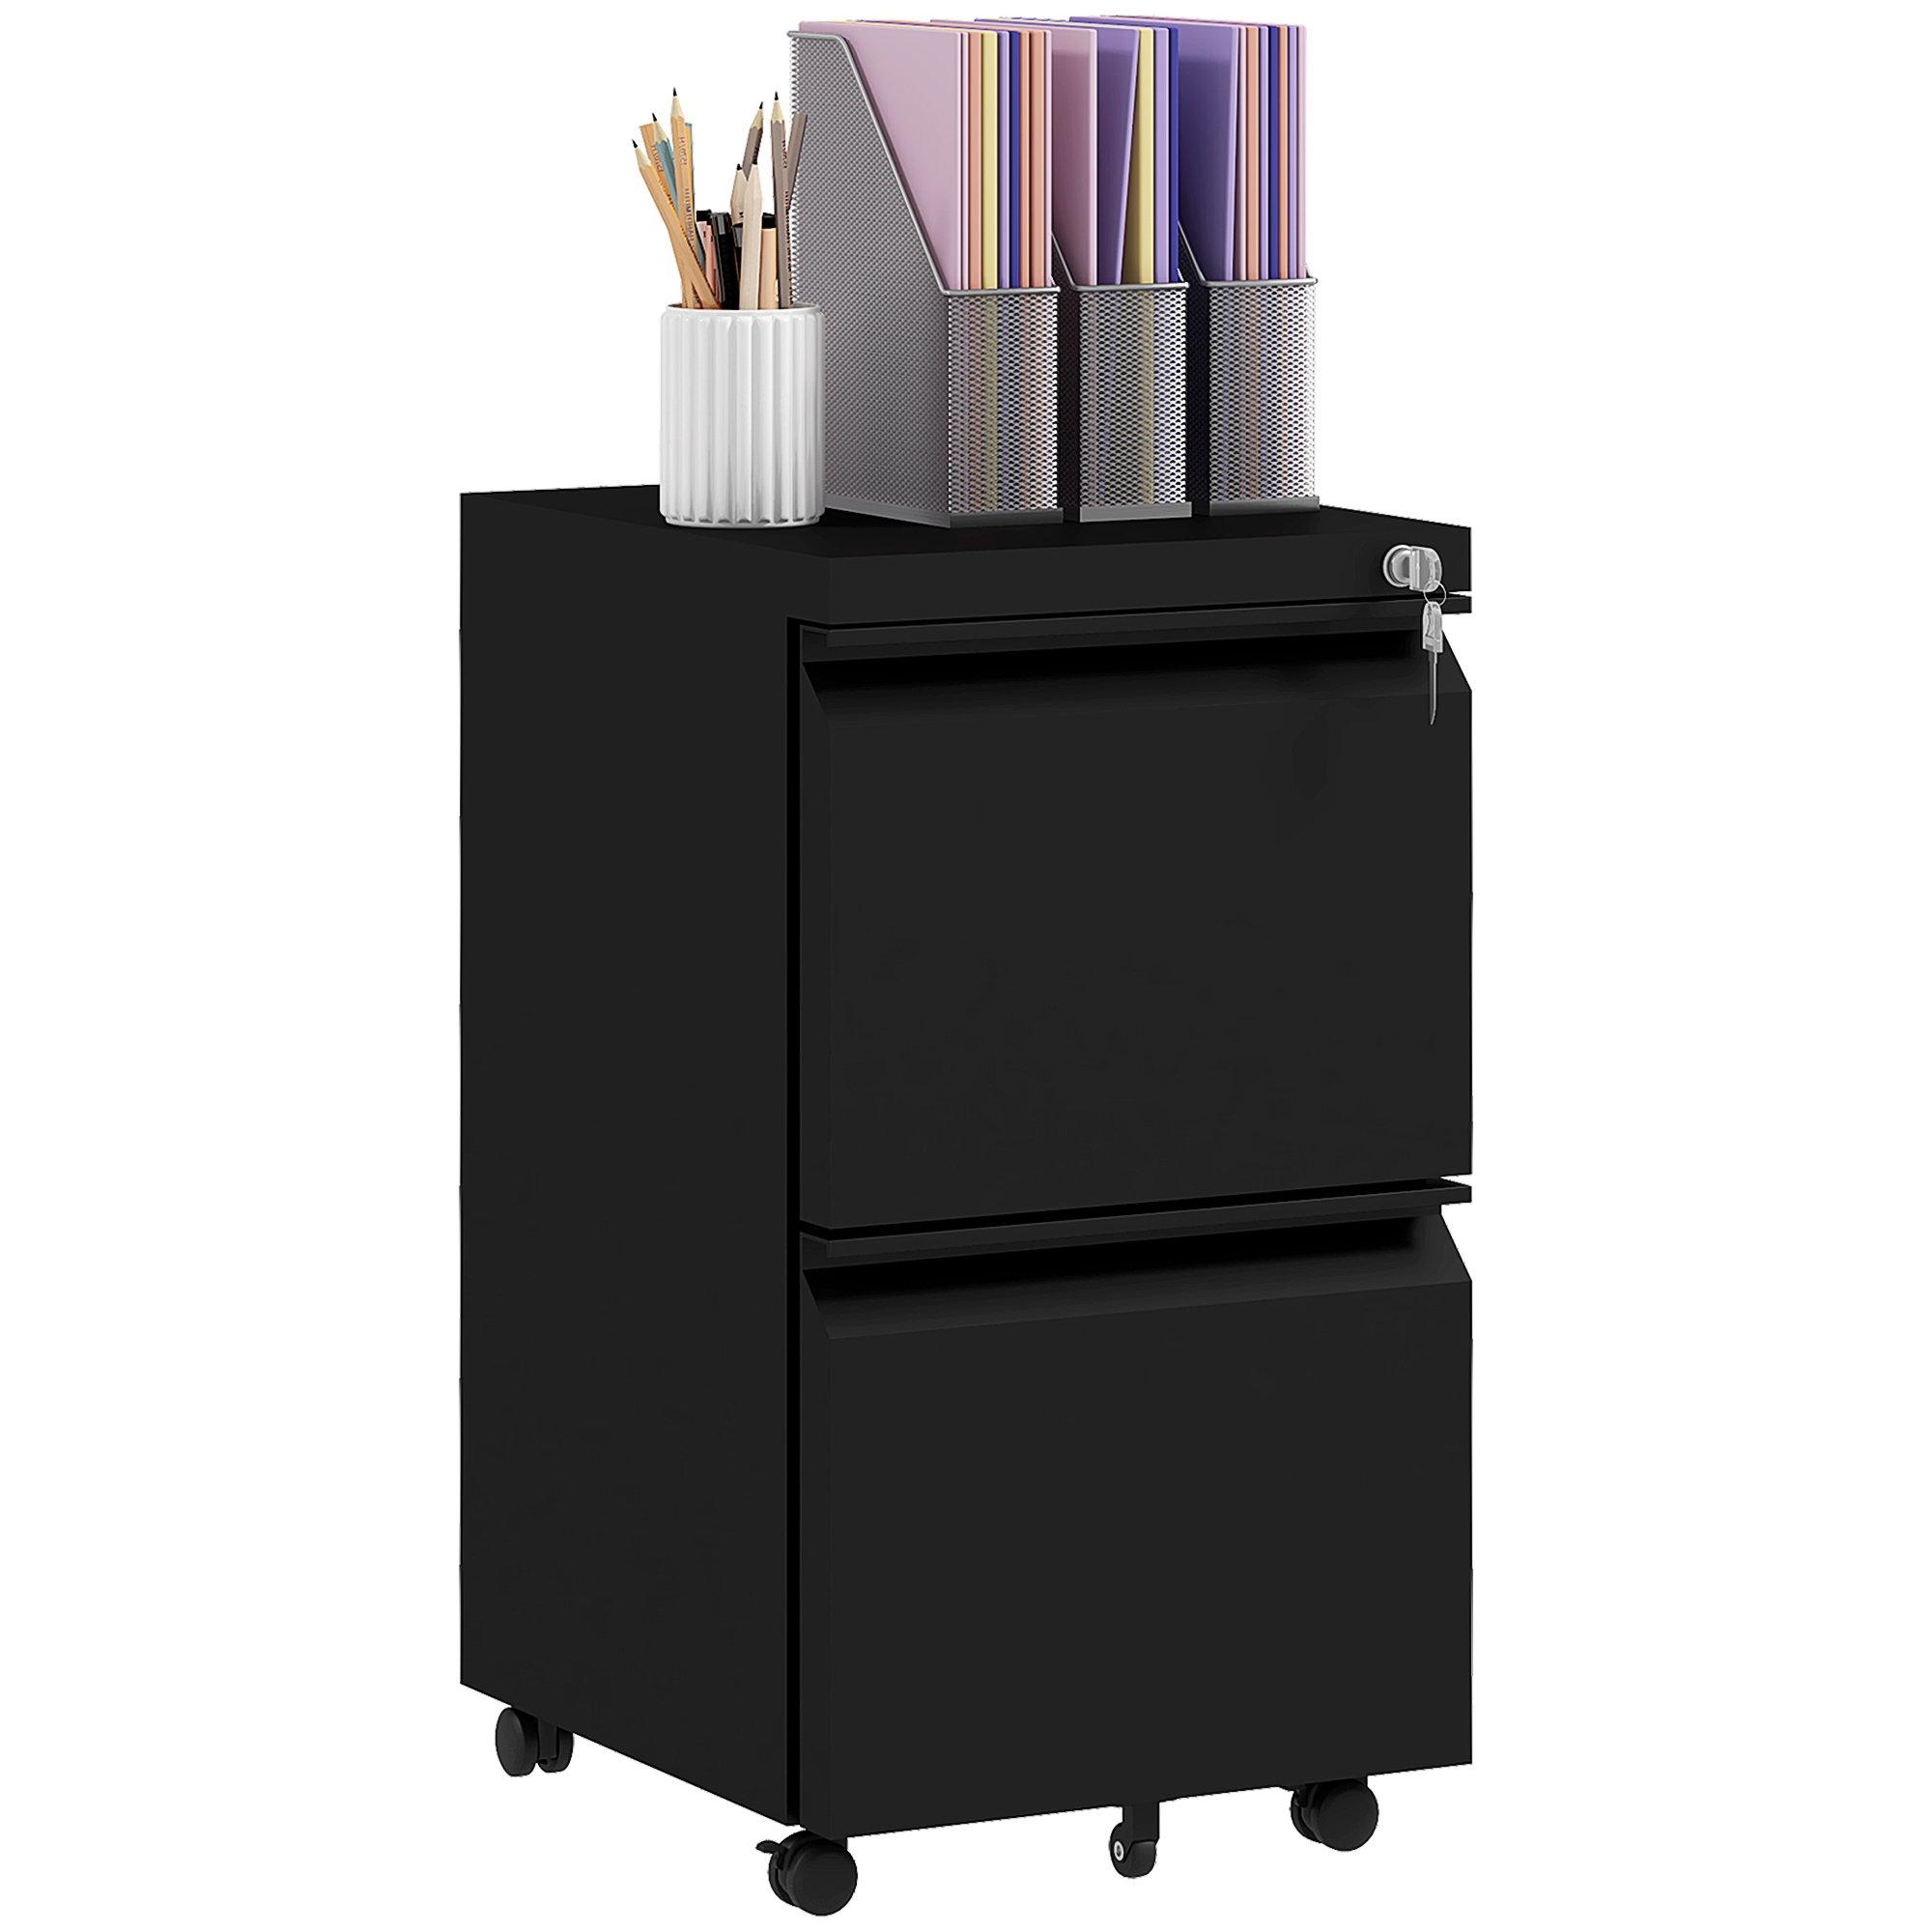 2 Drawers Filing Cabinet with Adjustable Hanging Bar Lockable Cabinet